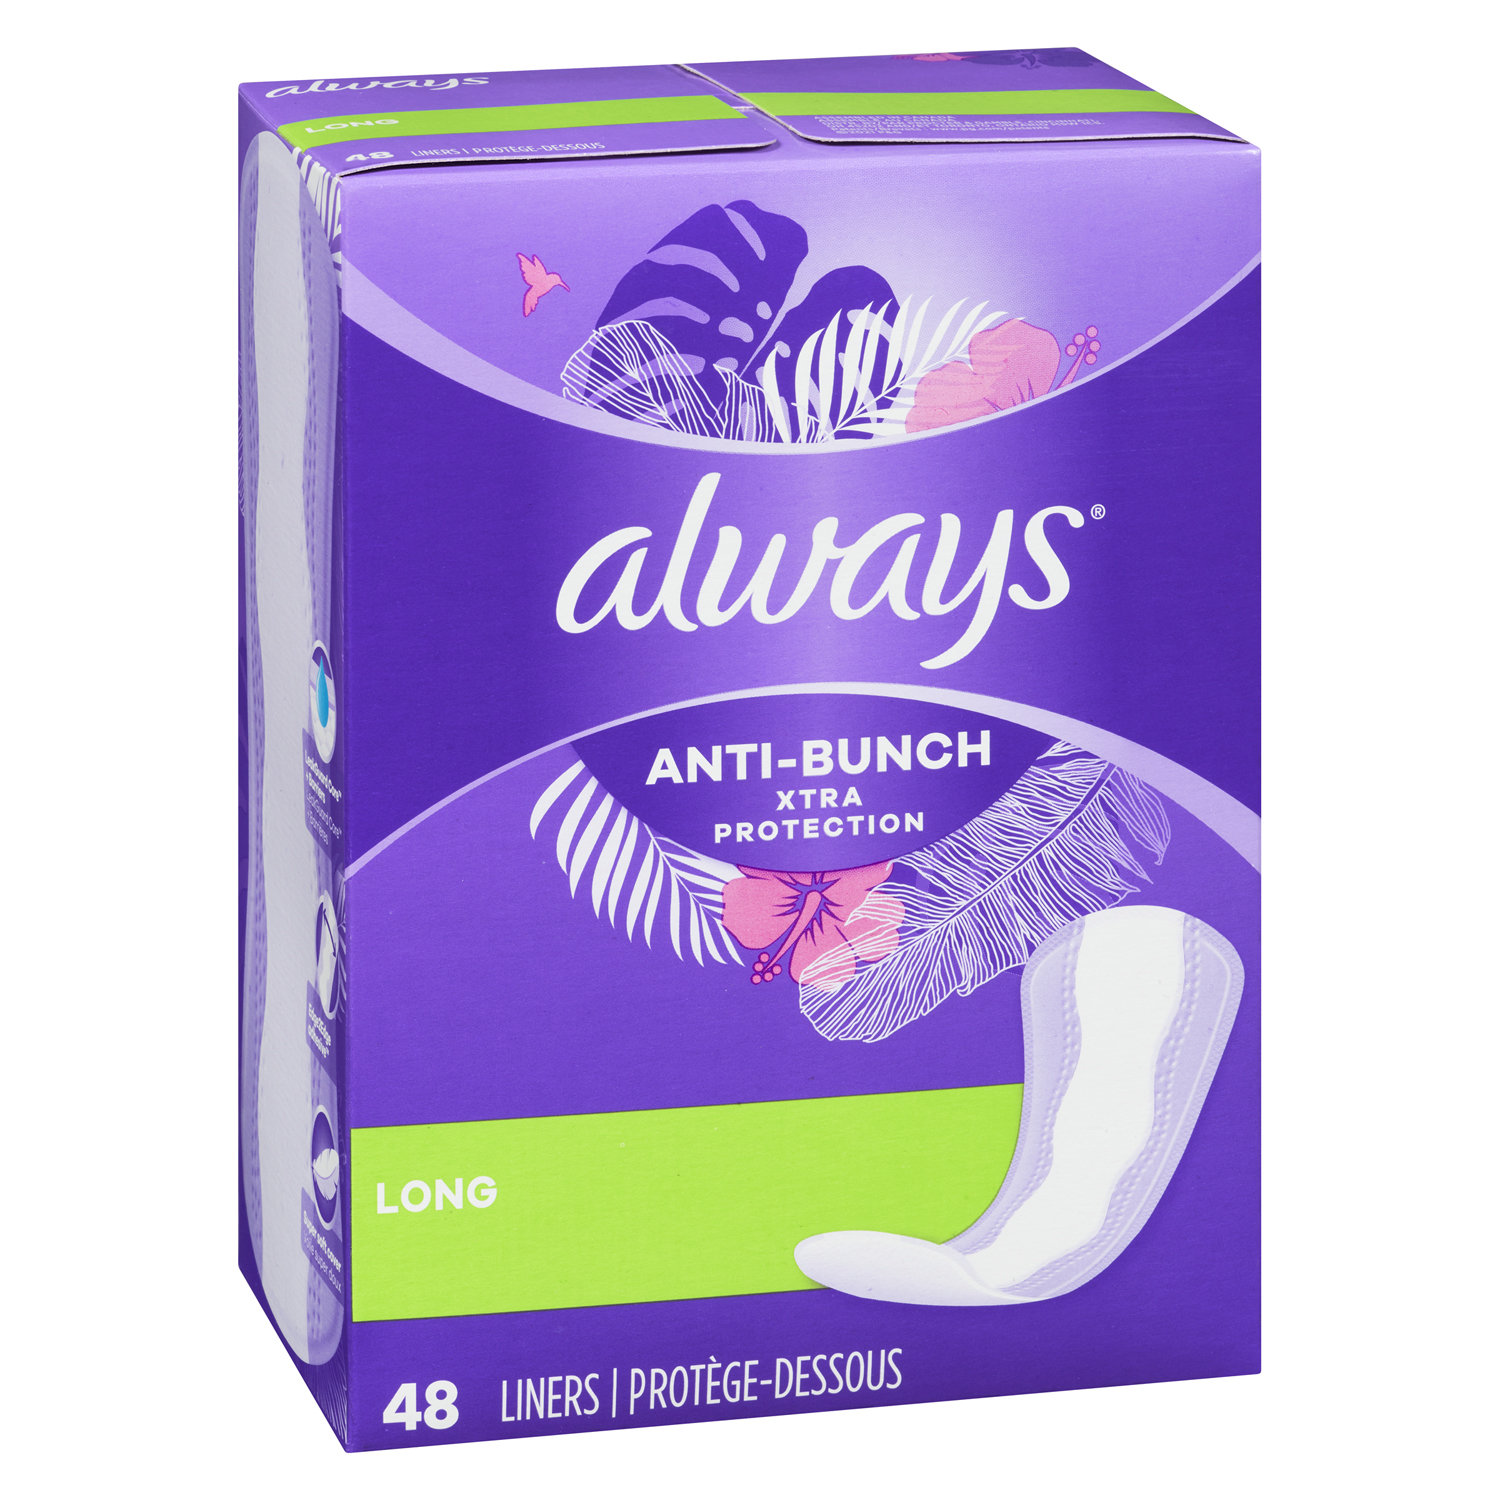 Panty Liners - Save-On-Foods